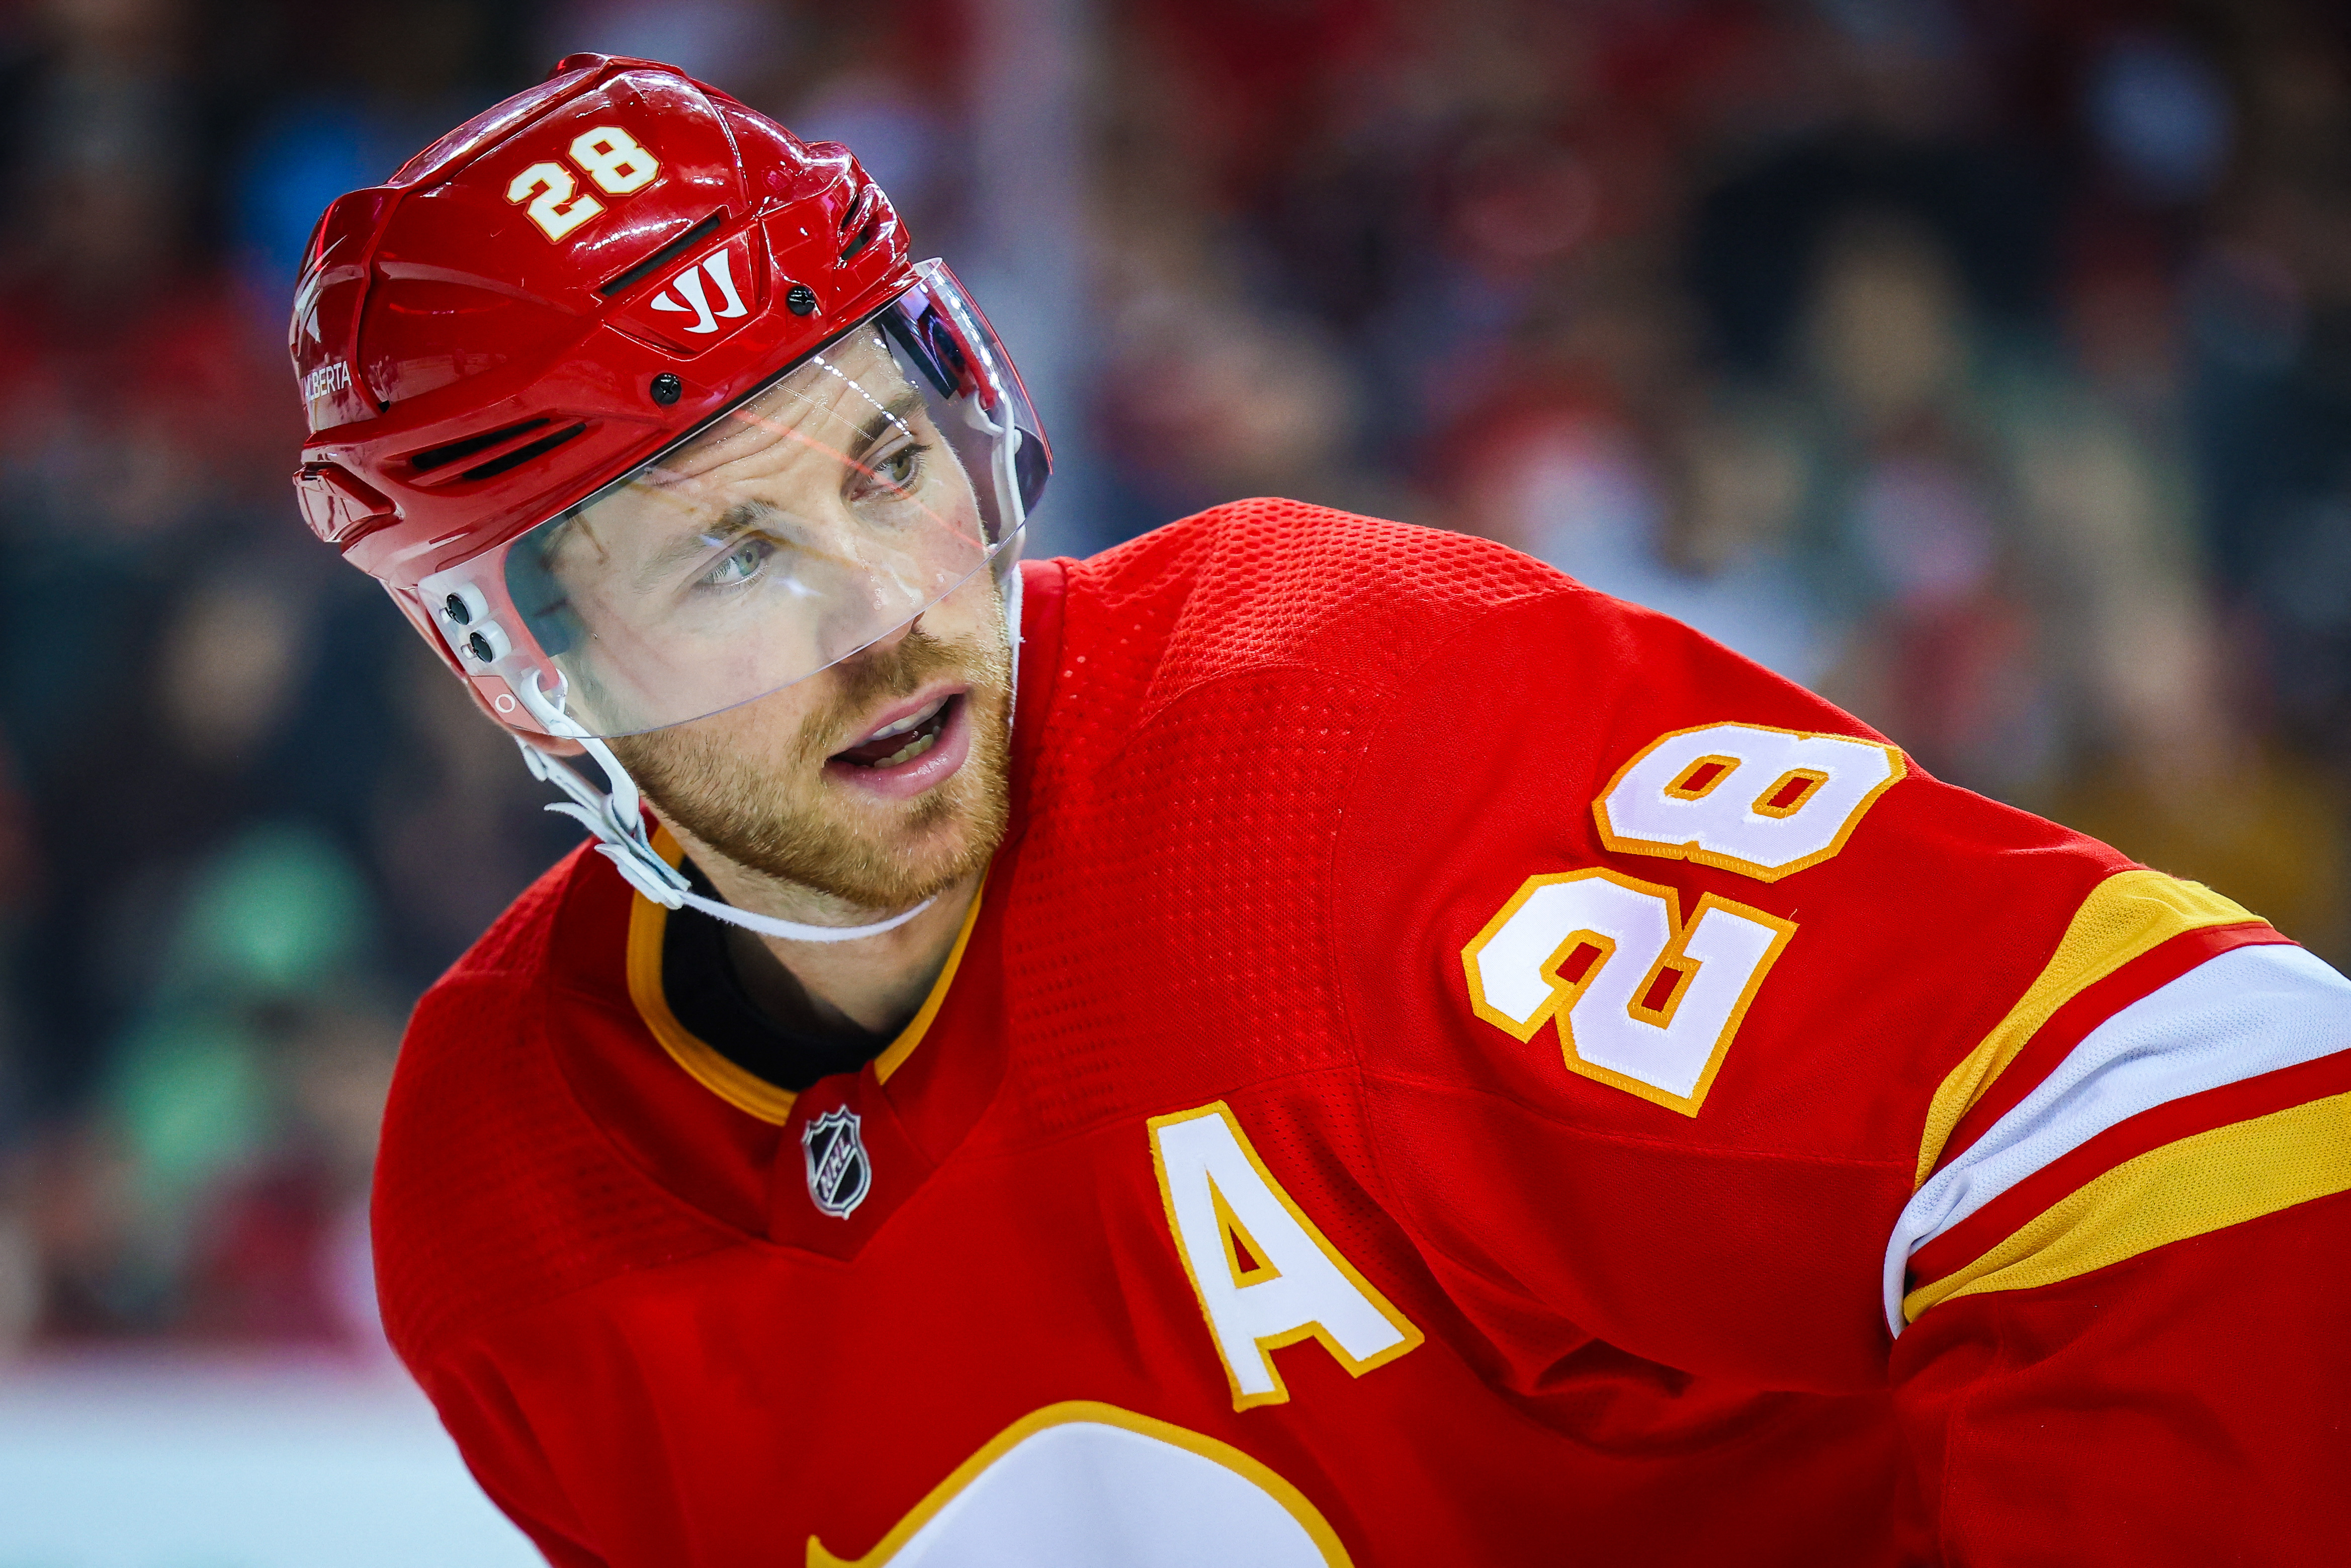 Andrew Mangiapane has 2 goals and an assist, Flames beat Jets 5-3 in opener, National Sports